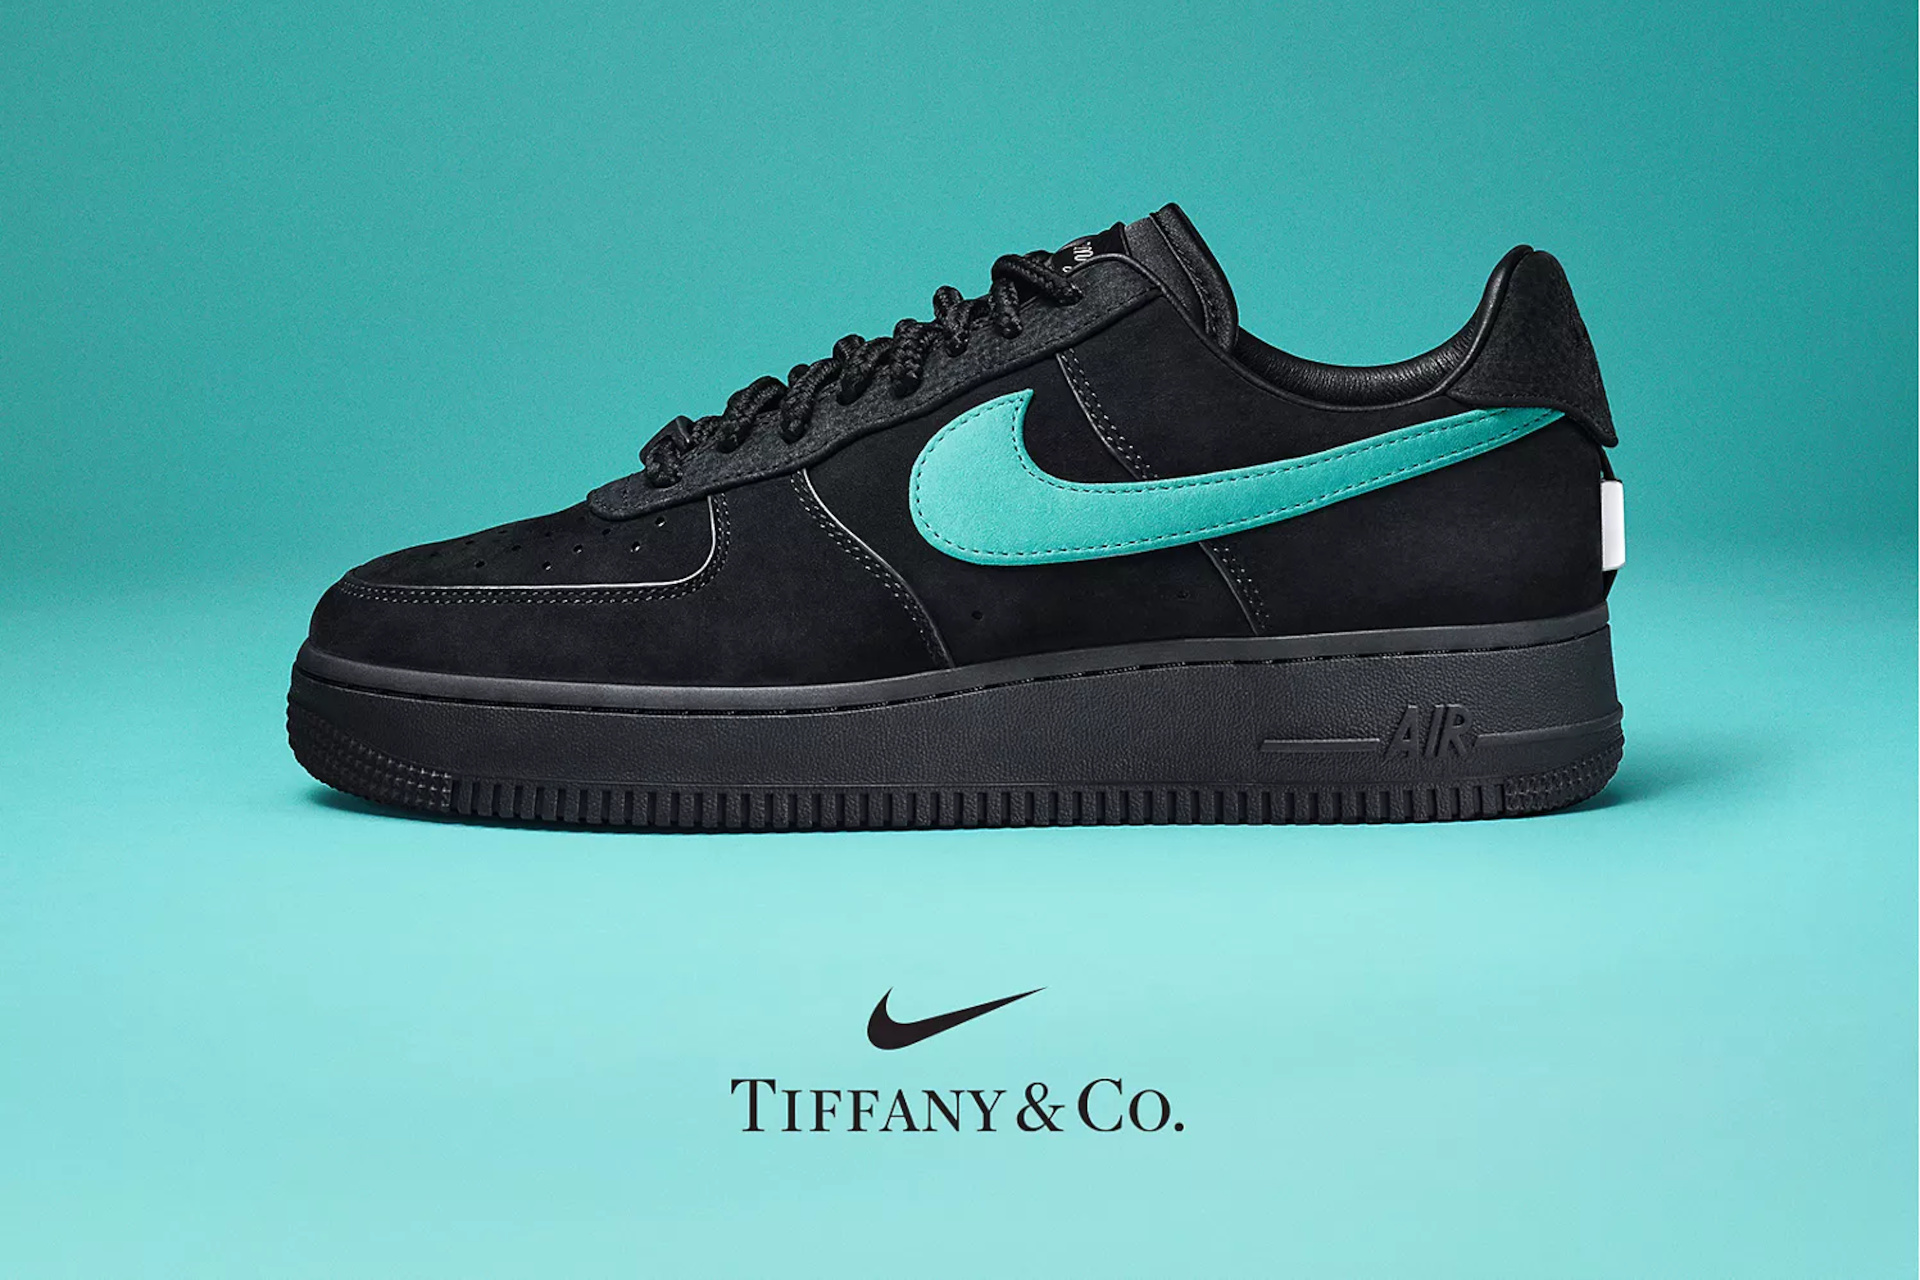 Tiffany & Co. And Nike Announce New Collaboration For 2023